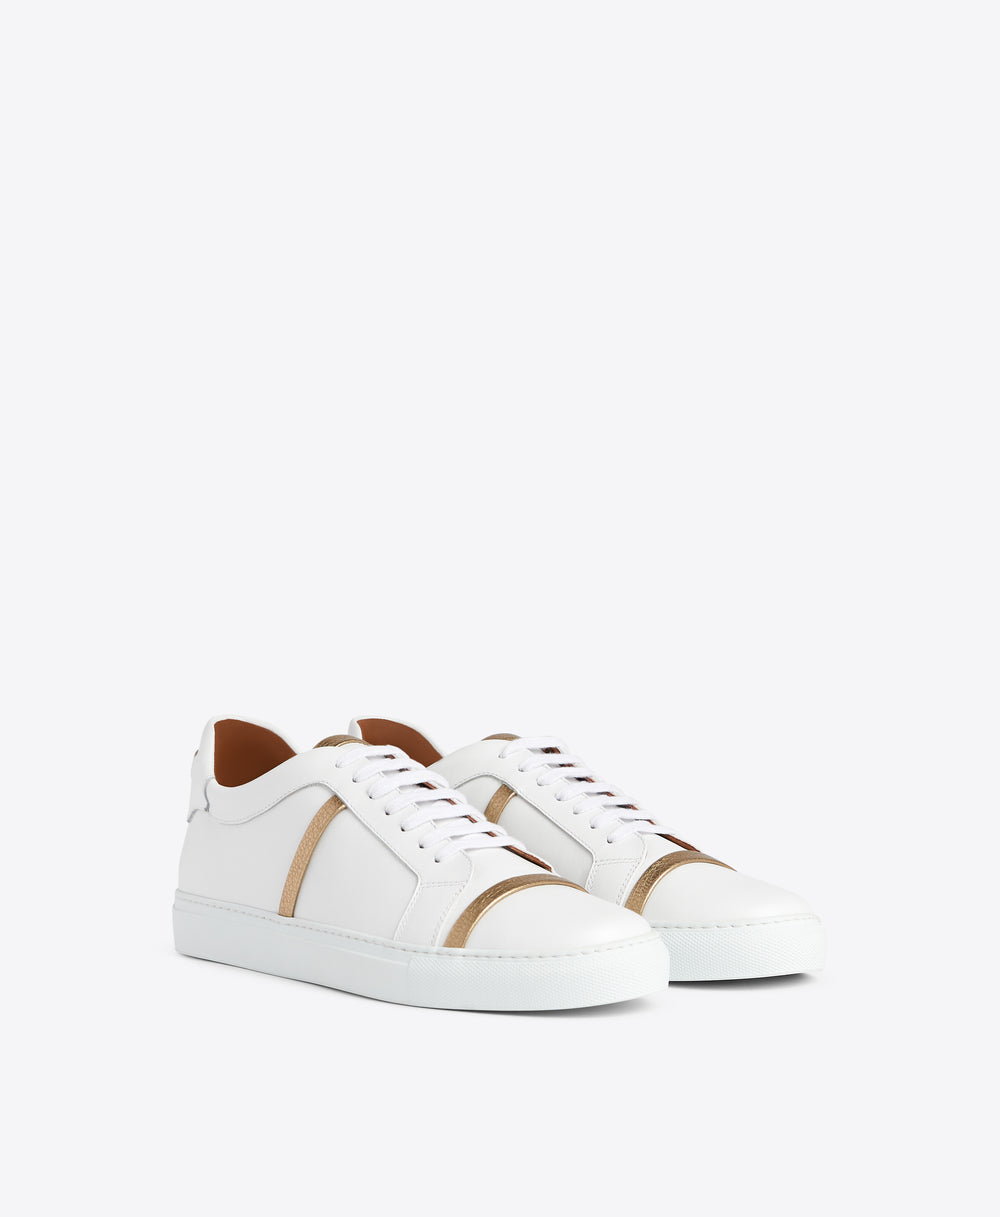 Men's Deon White and Gold Leather Sneakers Malone Souliers